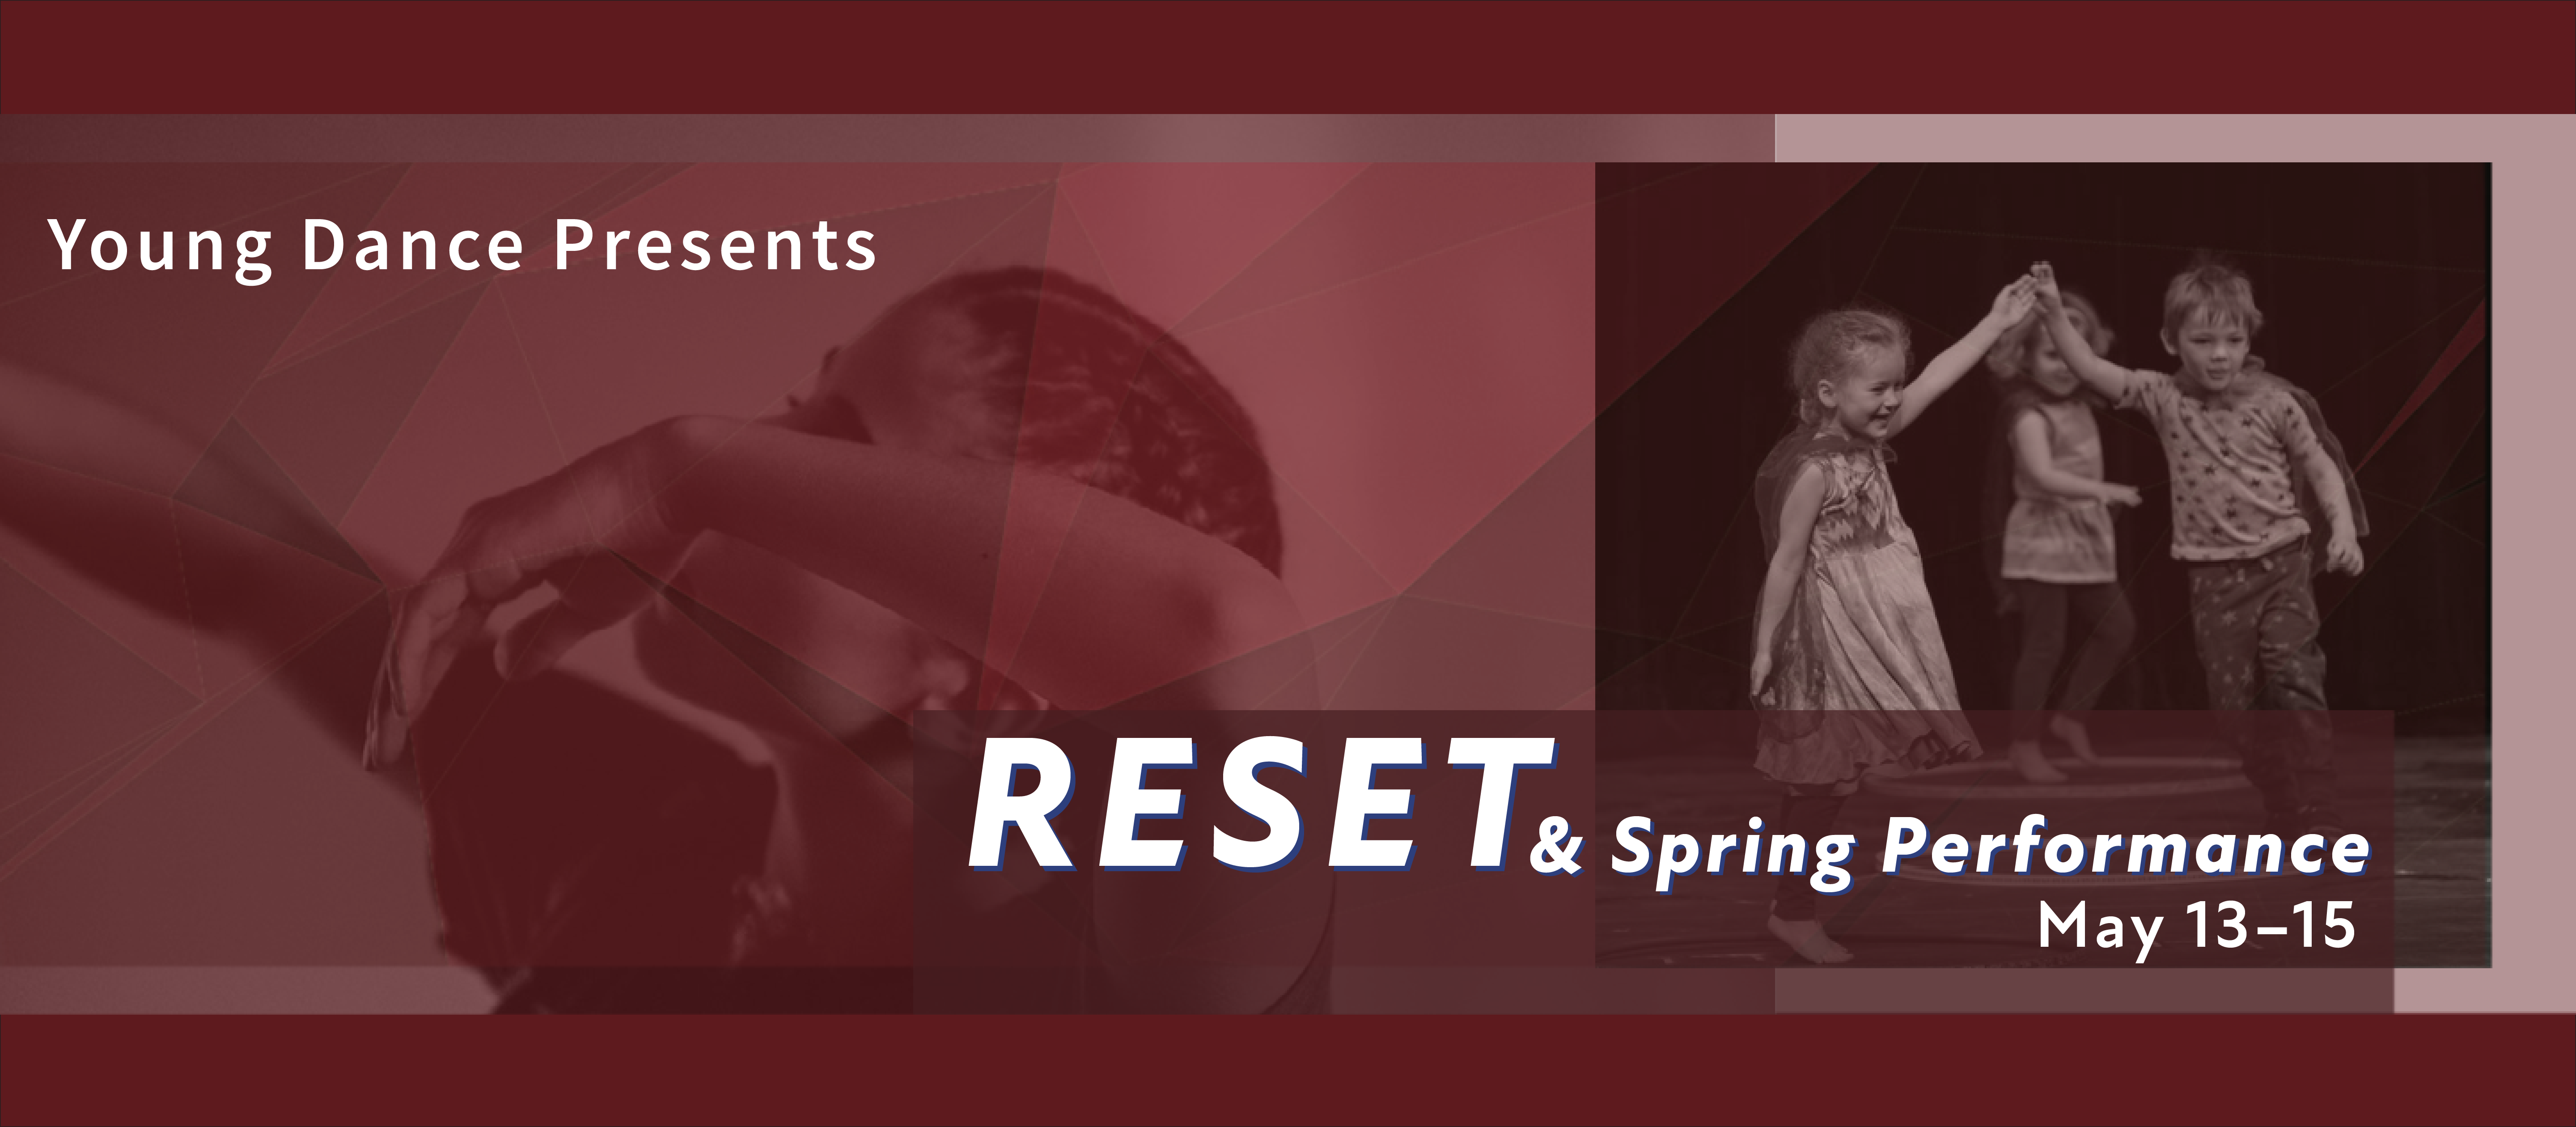 Image of girl with her arms up on left, image of kids in hula hoops on right. Text says, "Young Dance presents RESET and Spring Performance May 13–15"